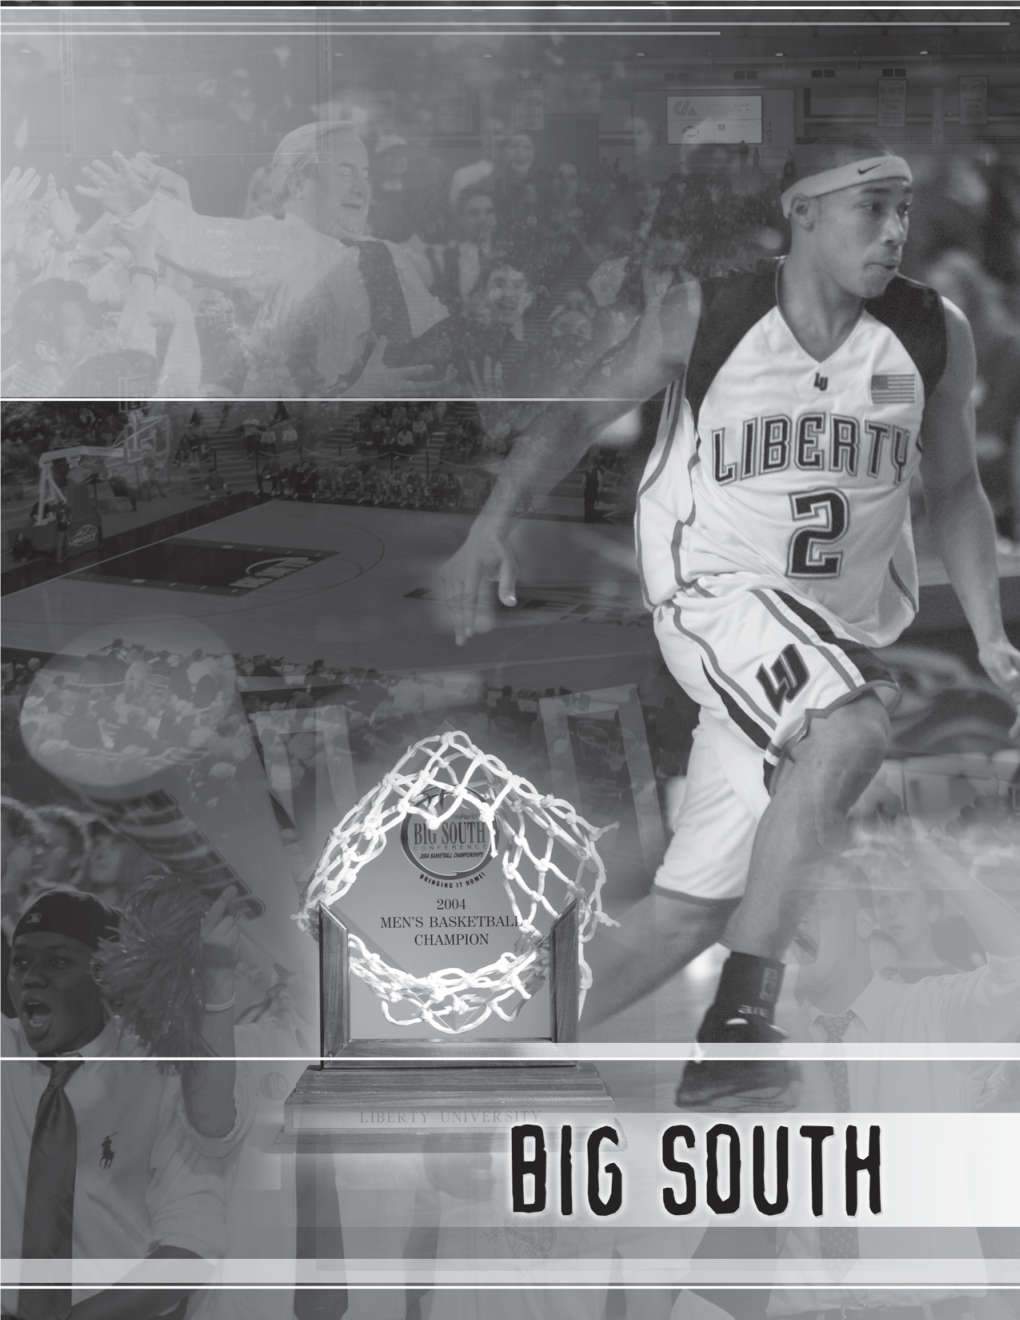 Big South Section (Pages 89-98).Pdf